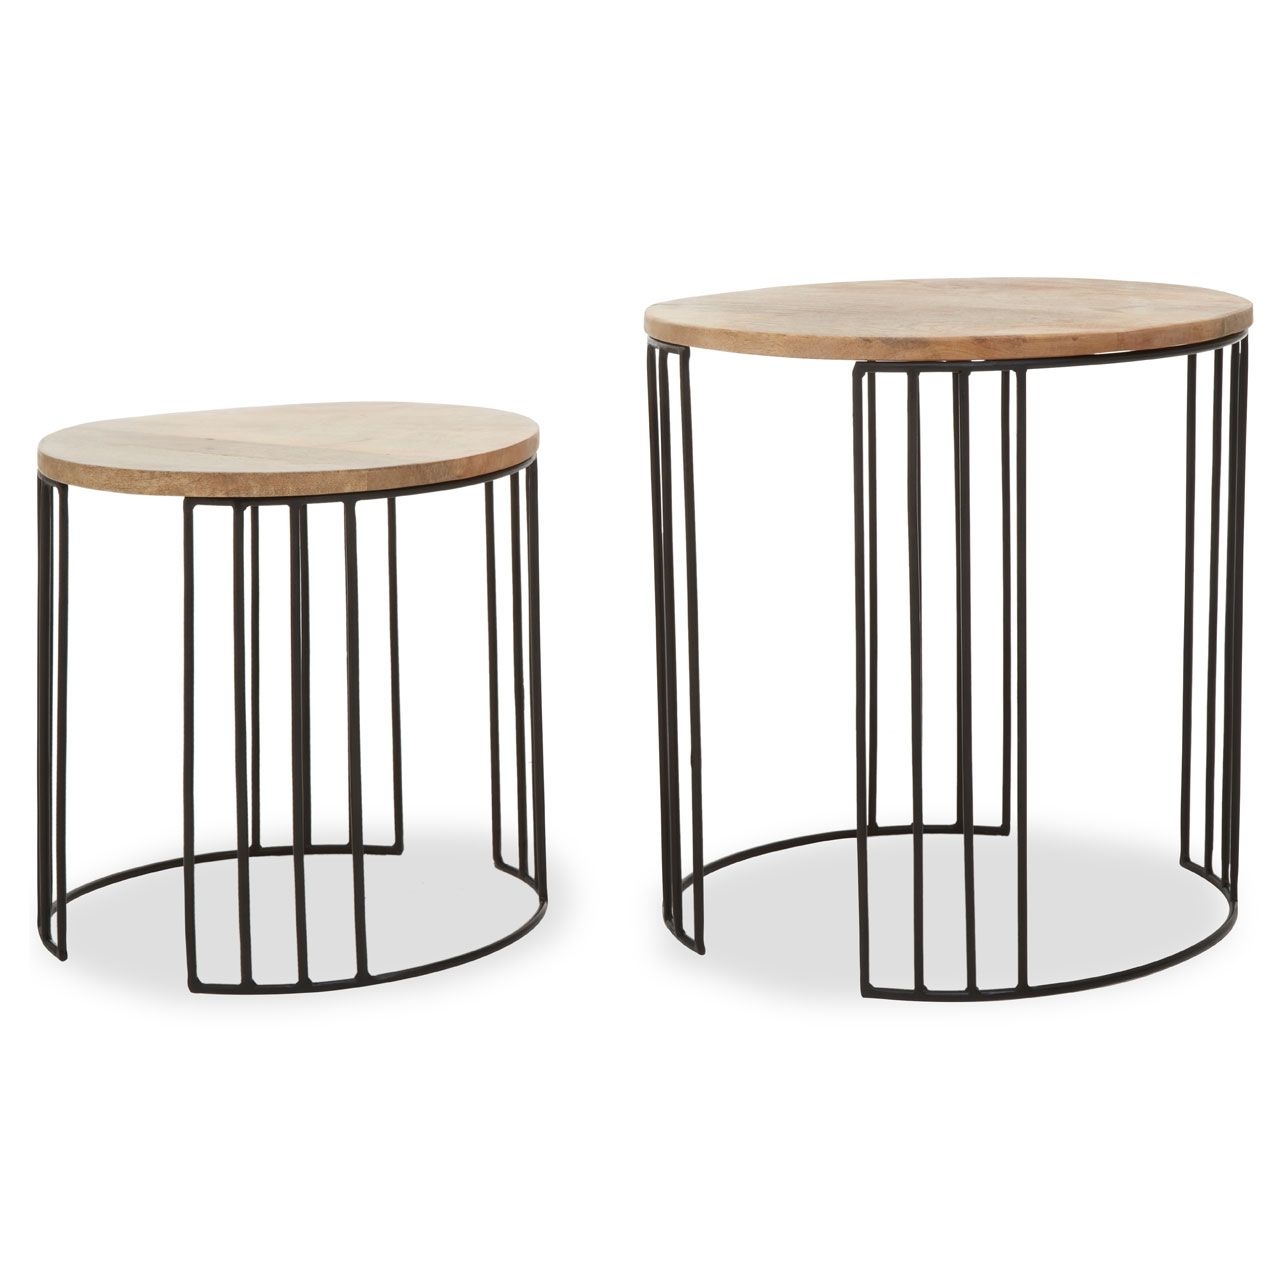 Nandri Round Wooden Set Of 2 Side Tables In Natural With Black Metal Legs